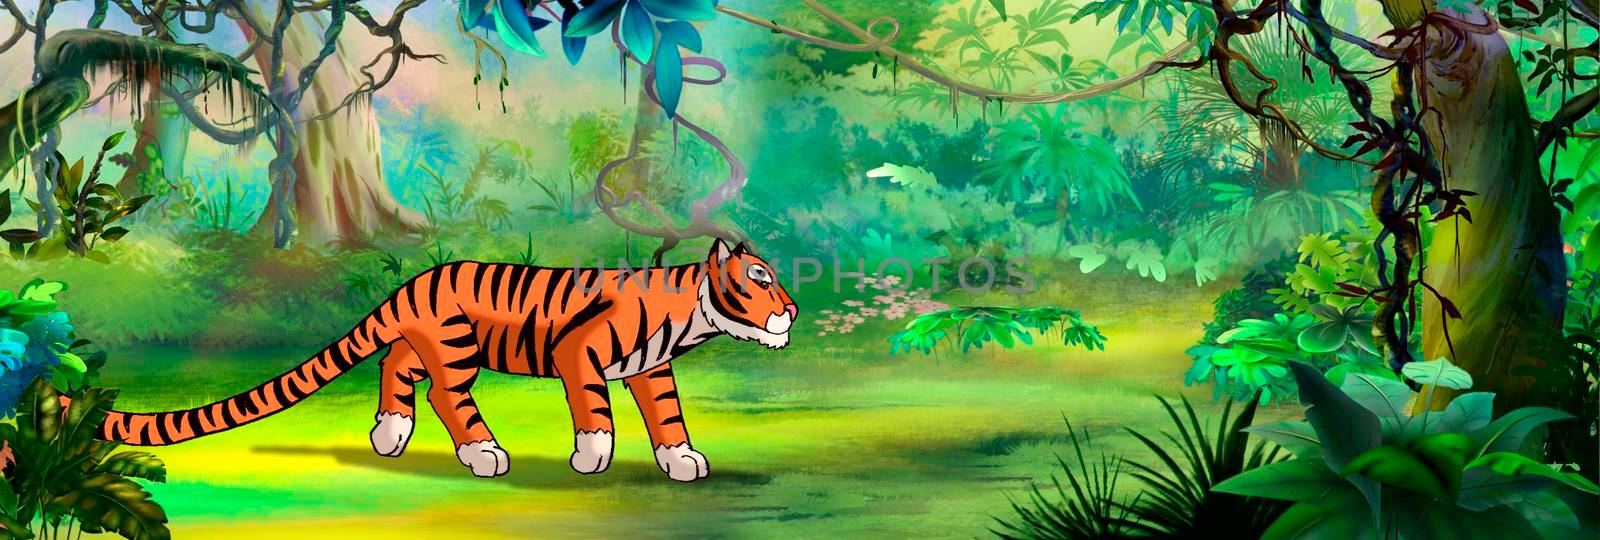 Tiger in the rainforest. Digital Painting Background, Illustration.